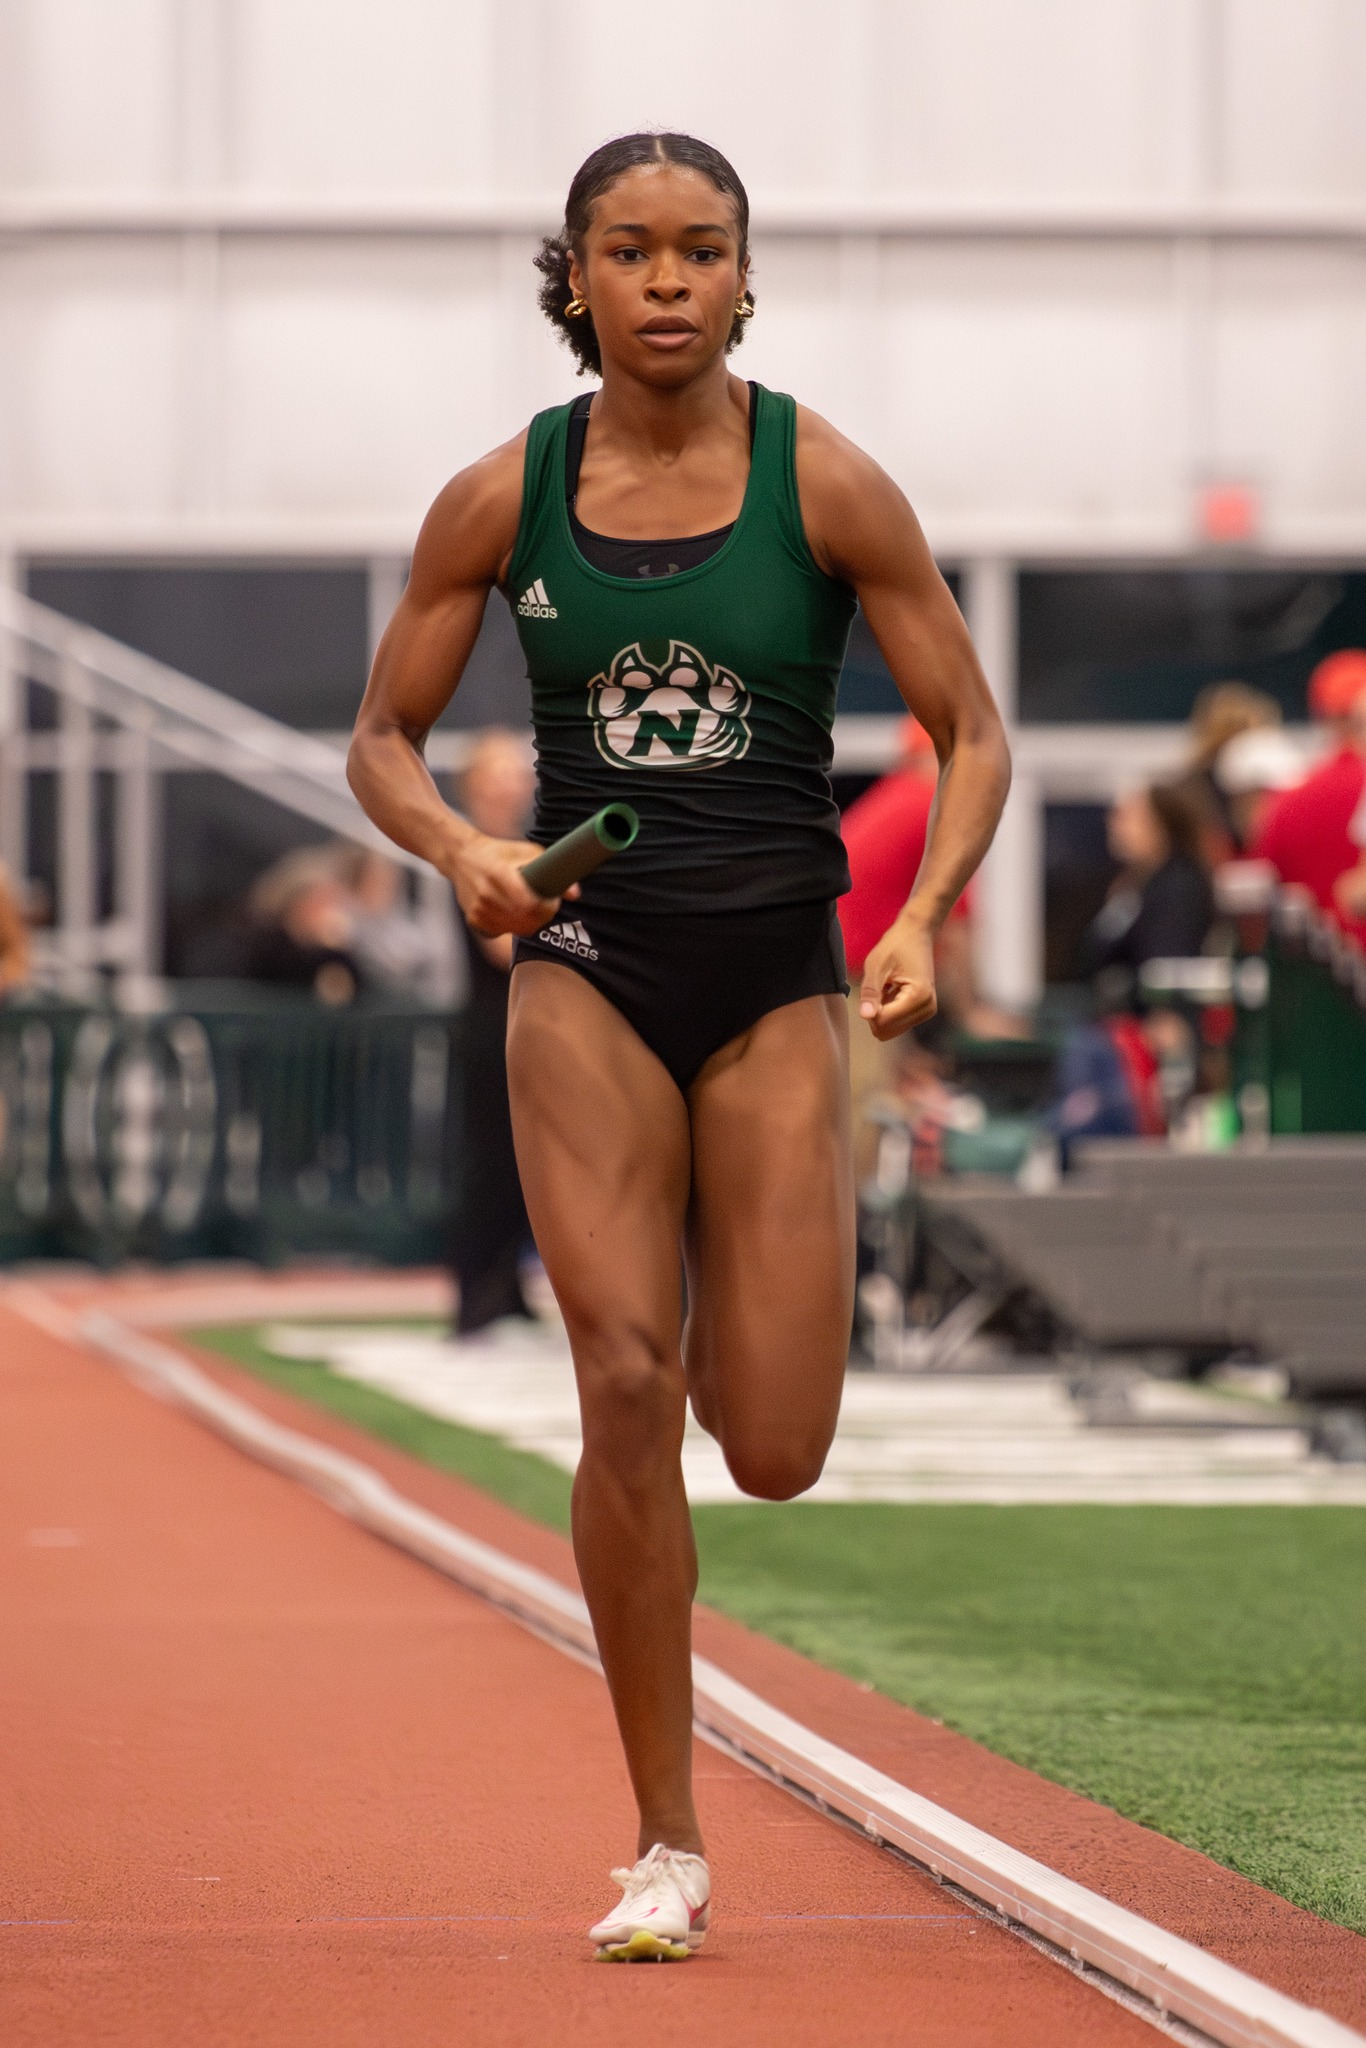 Tiffany Hughey will compete in the 400m at the USATF Indoor National Championships this weekend in Albuquerque, NM.